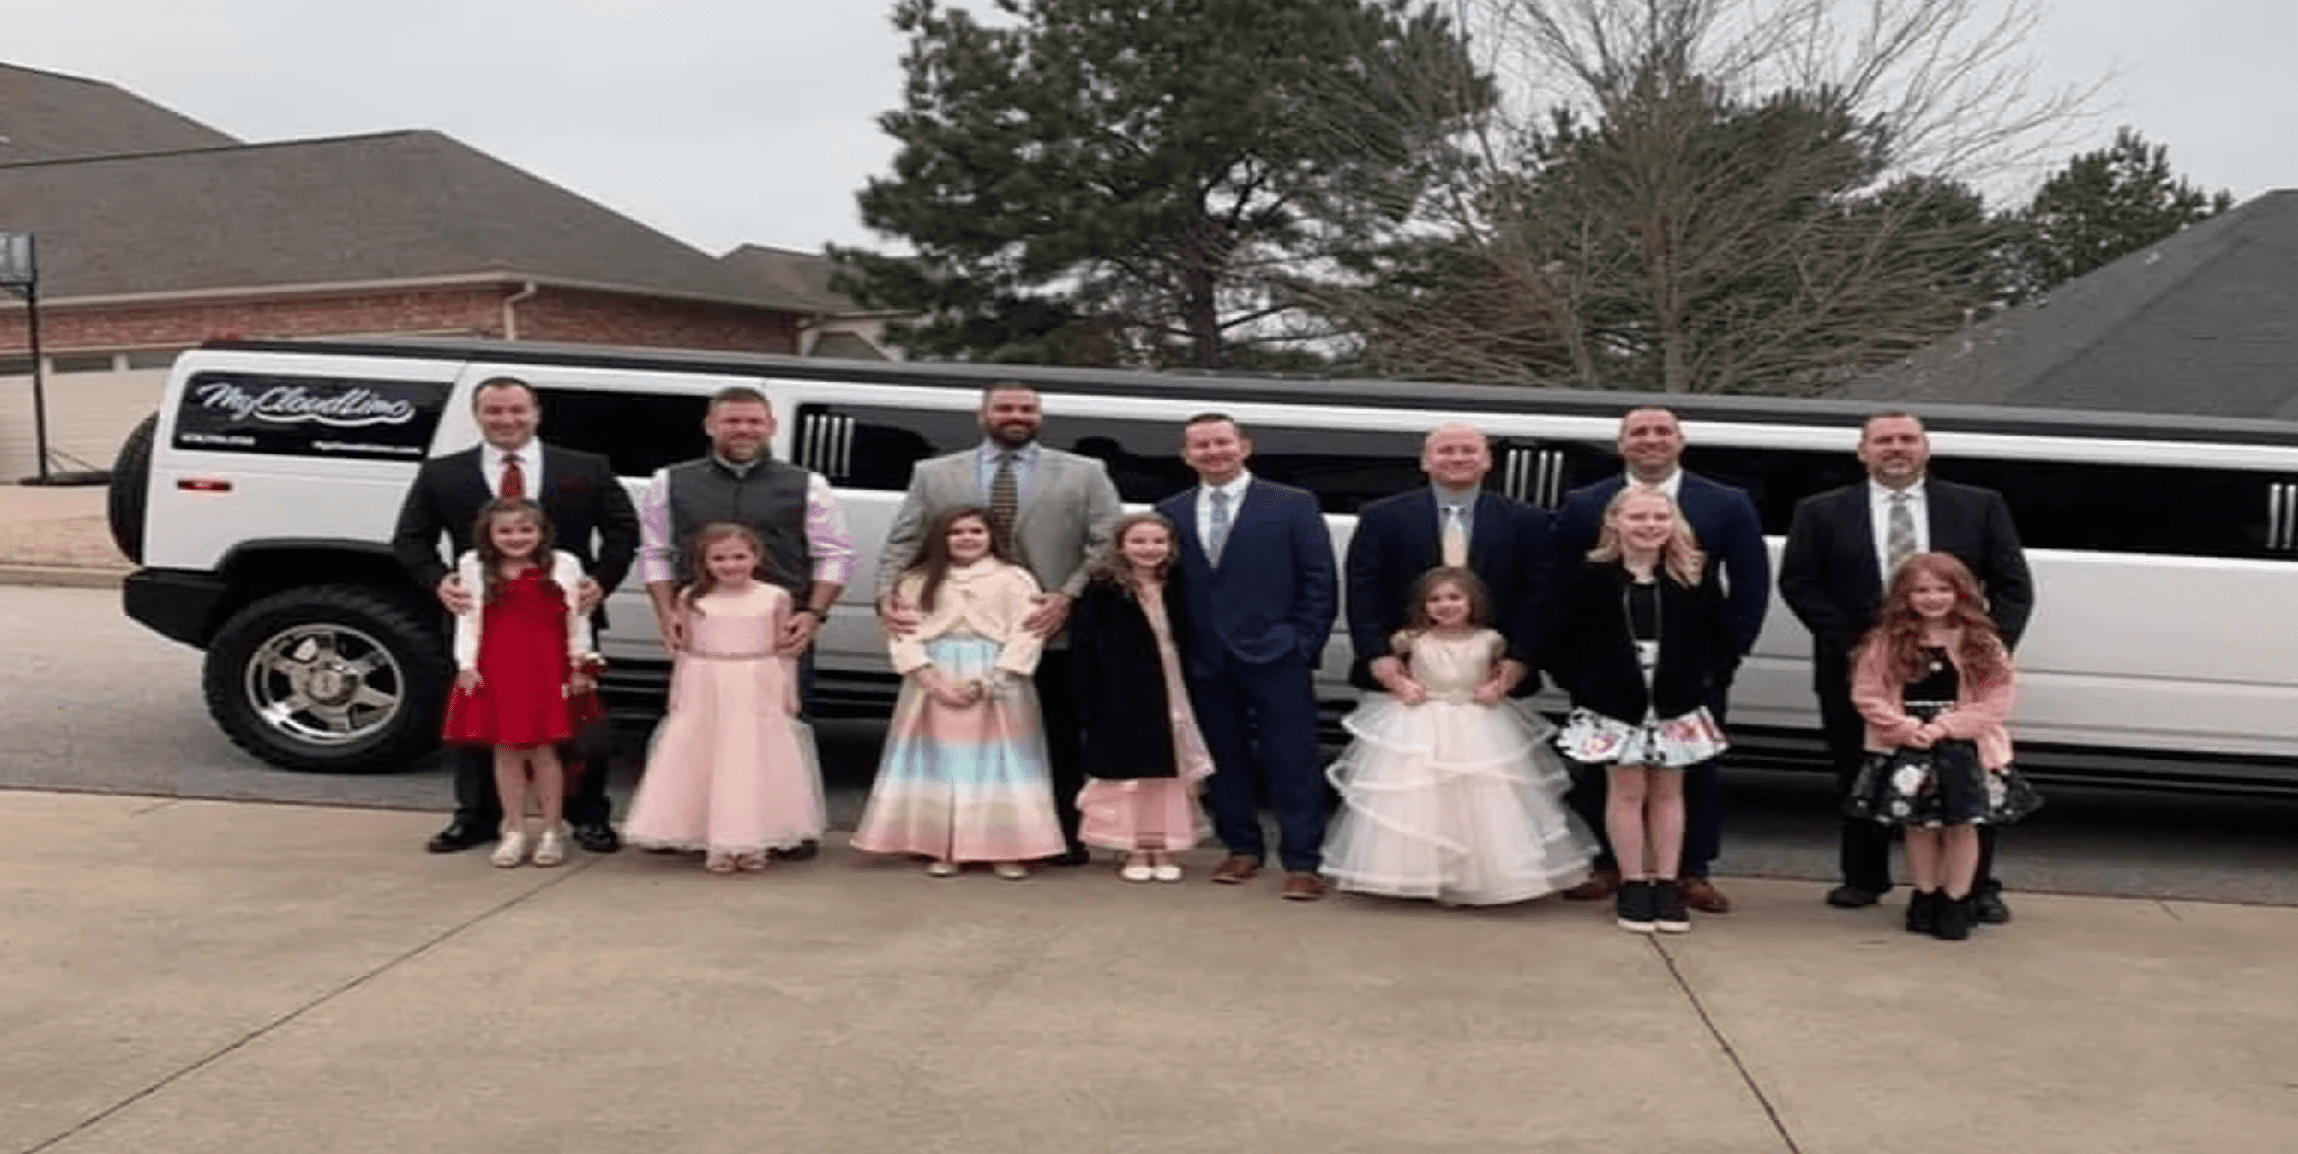 Dads and officers organized a limo for the girls. | Source: youtube.com/CBS 17